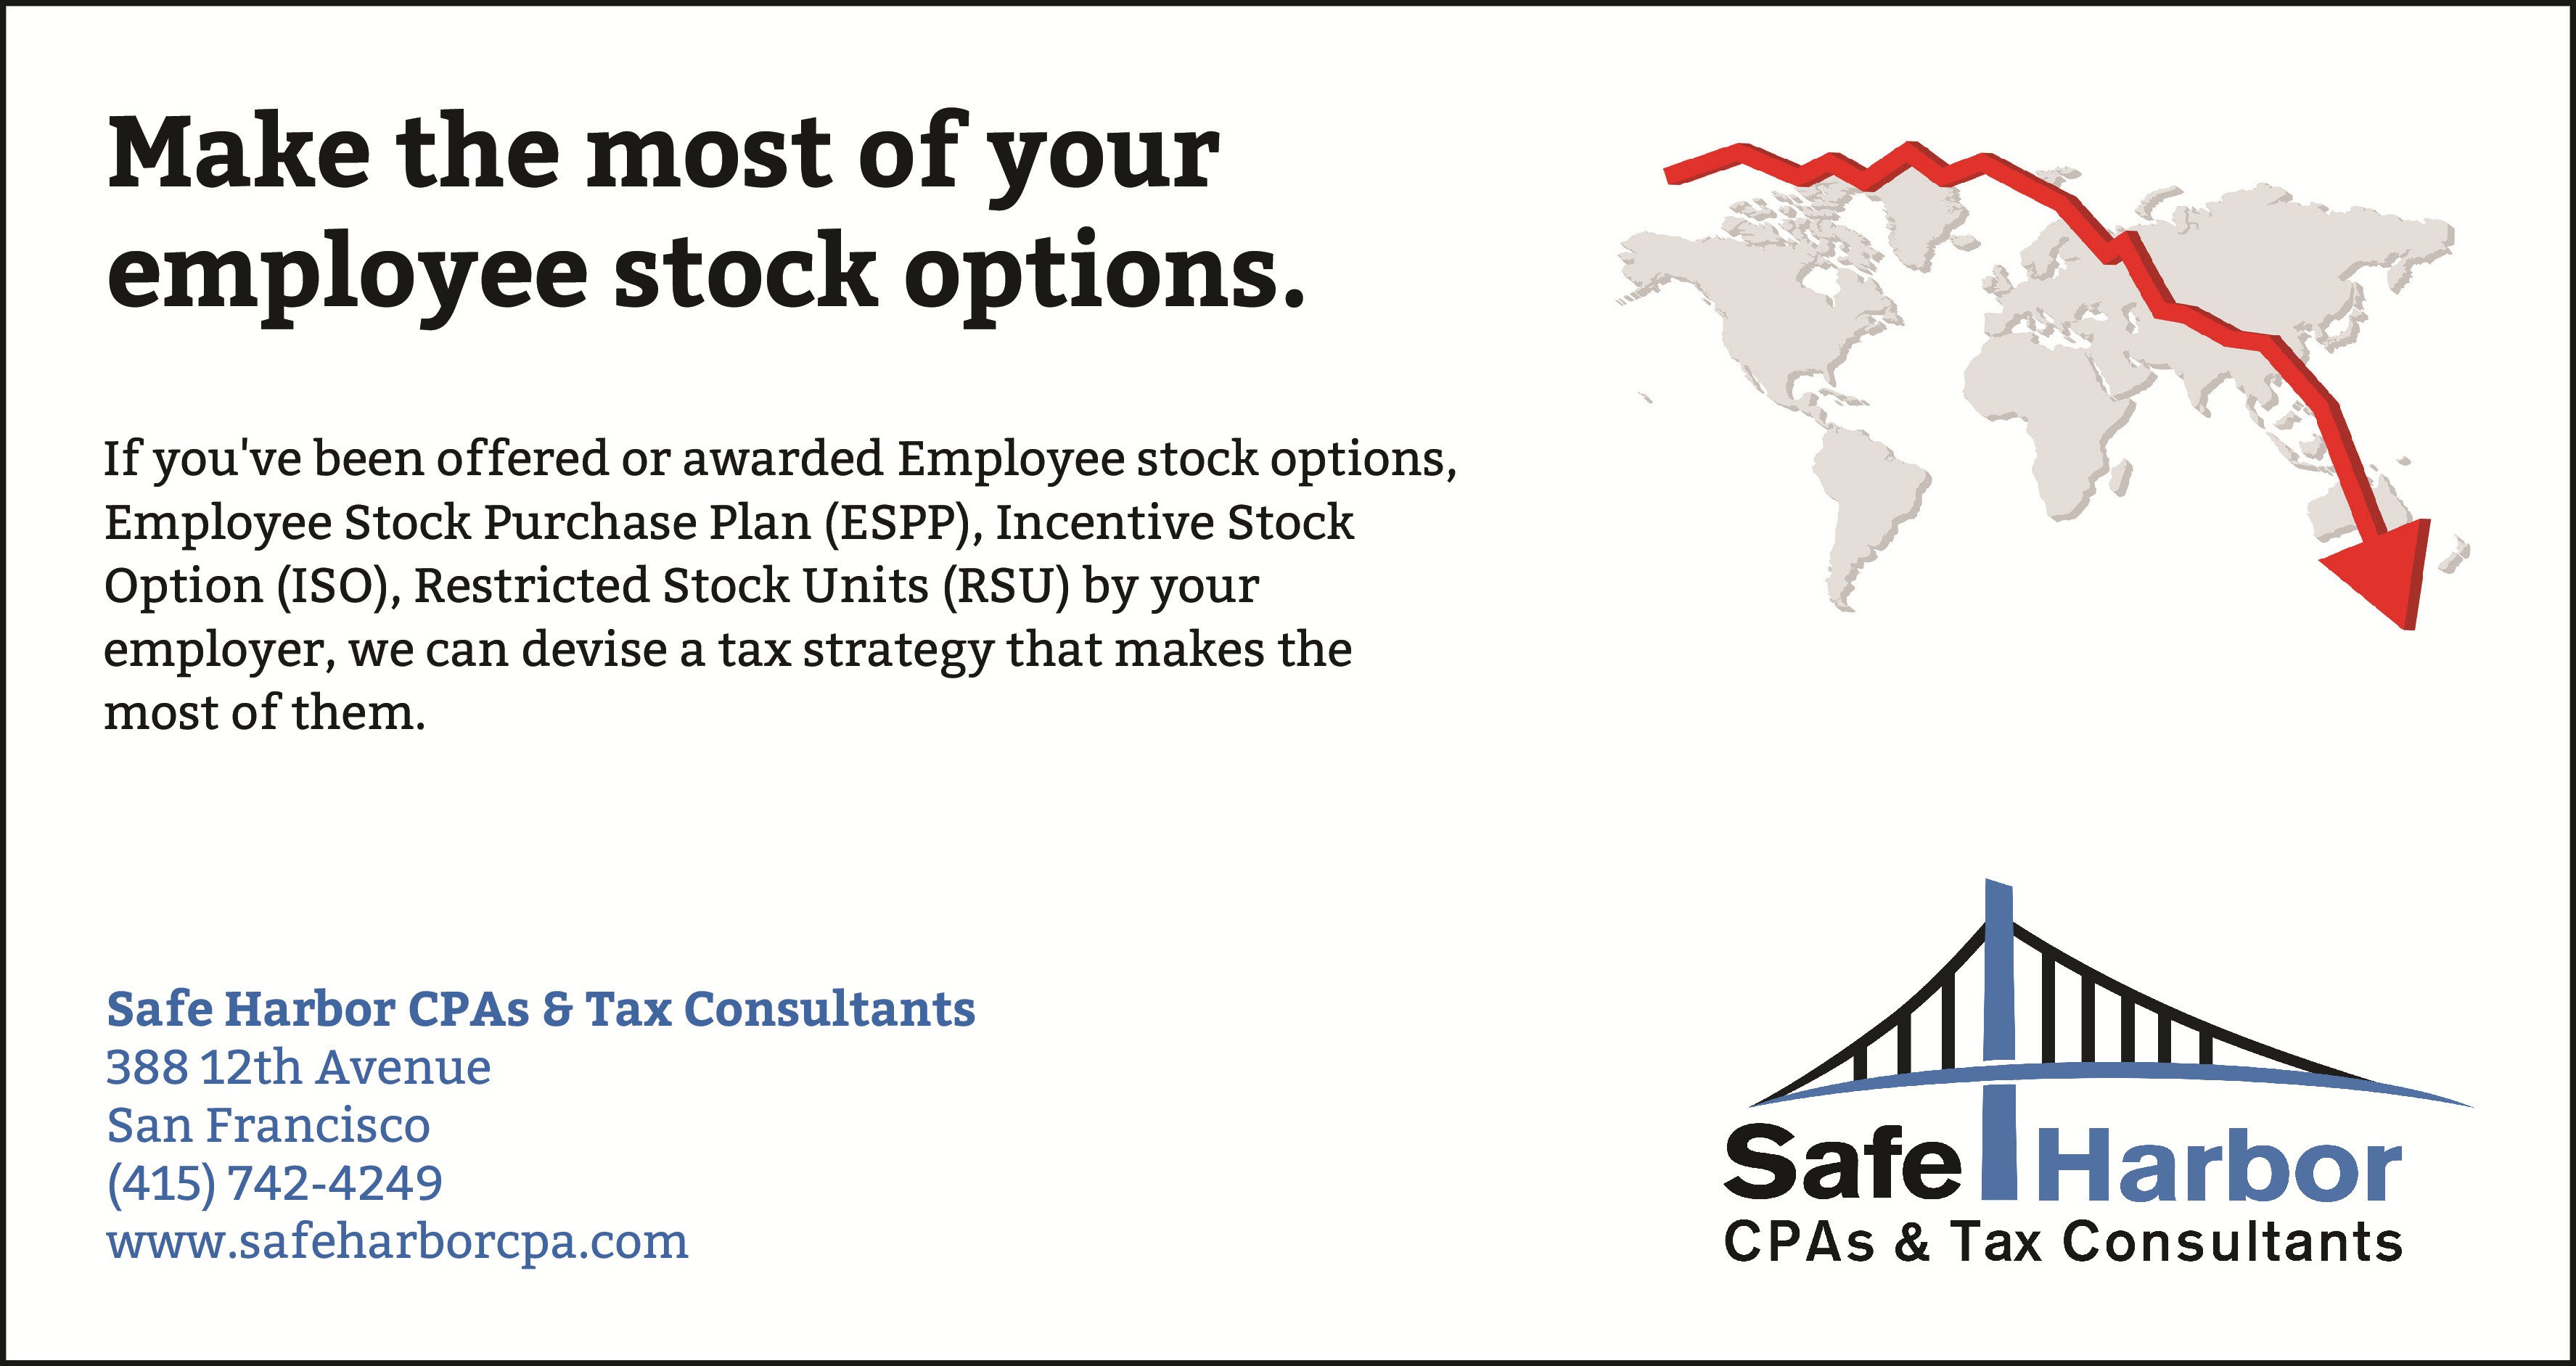 stock options as part of compensation package